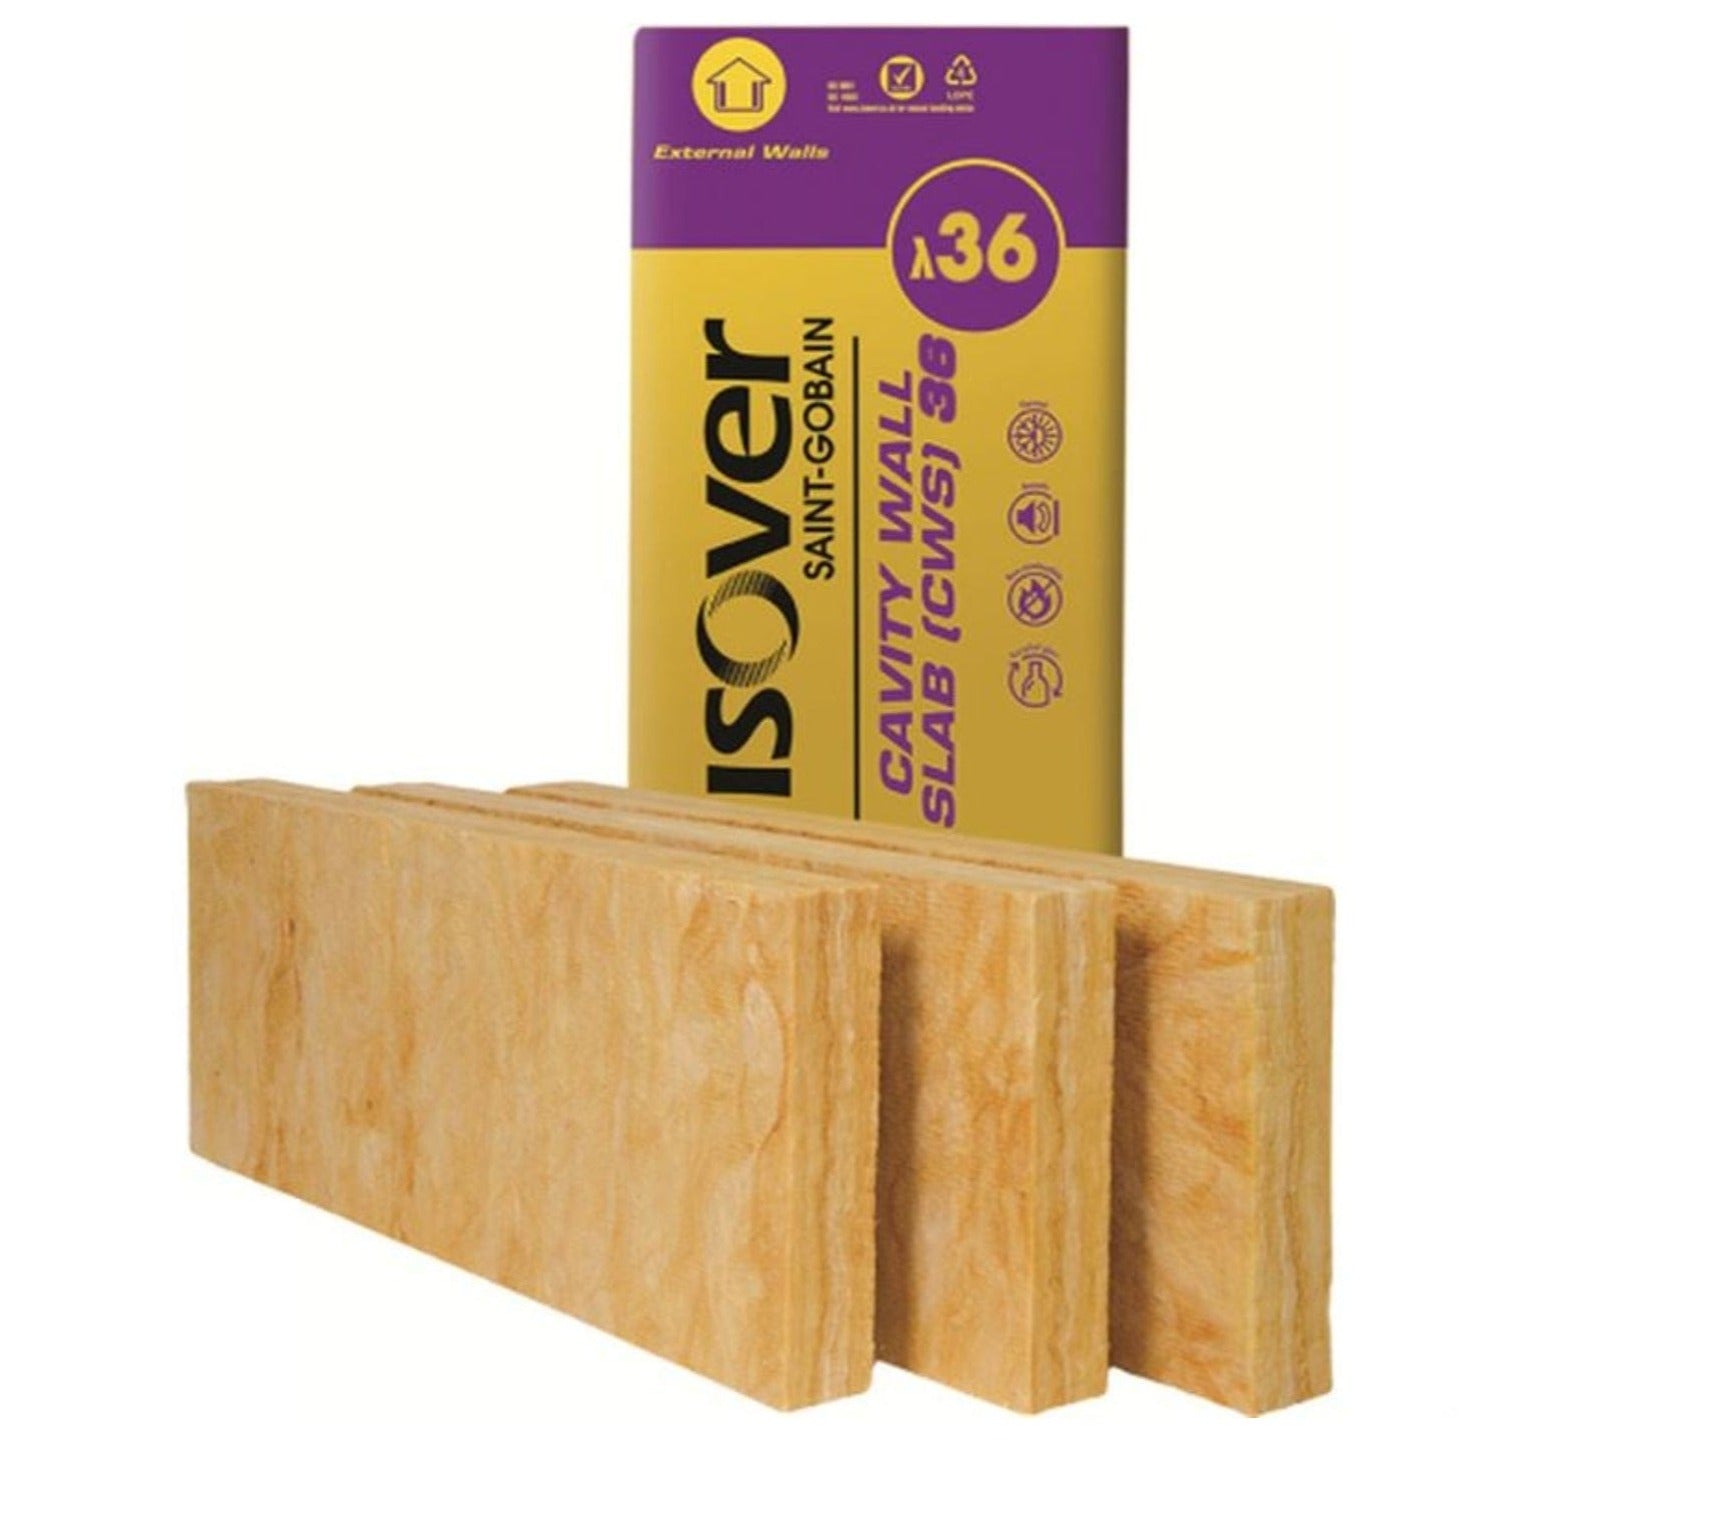 Isover Insulation Isover Cavity Wall Slab CWS 36 Isover Cavity Wall Slab CWS - insulationuk.co.uk